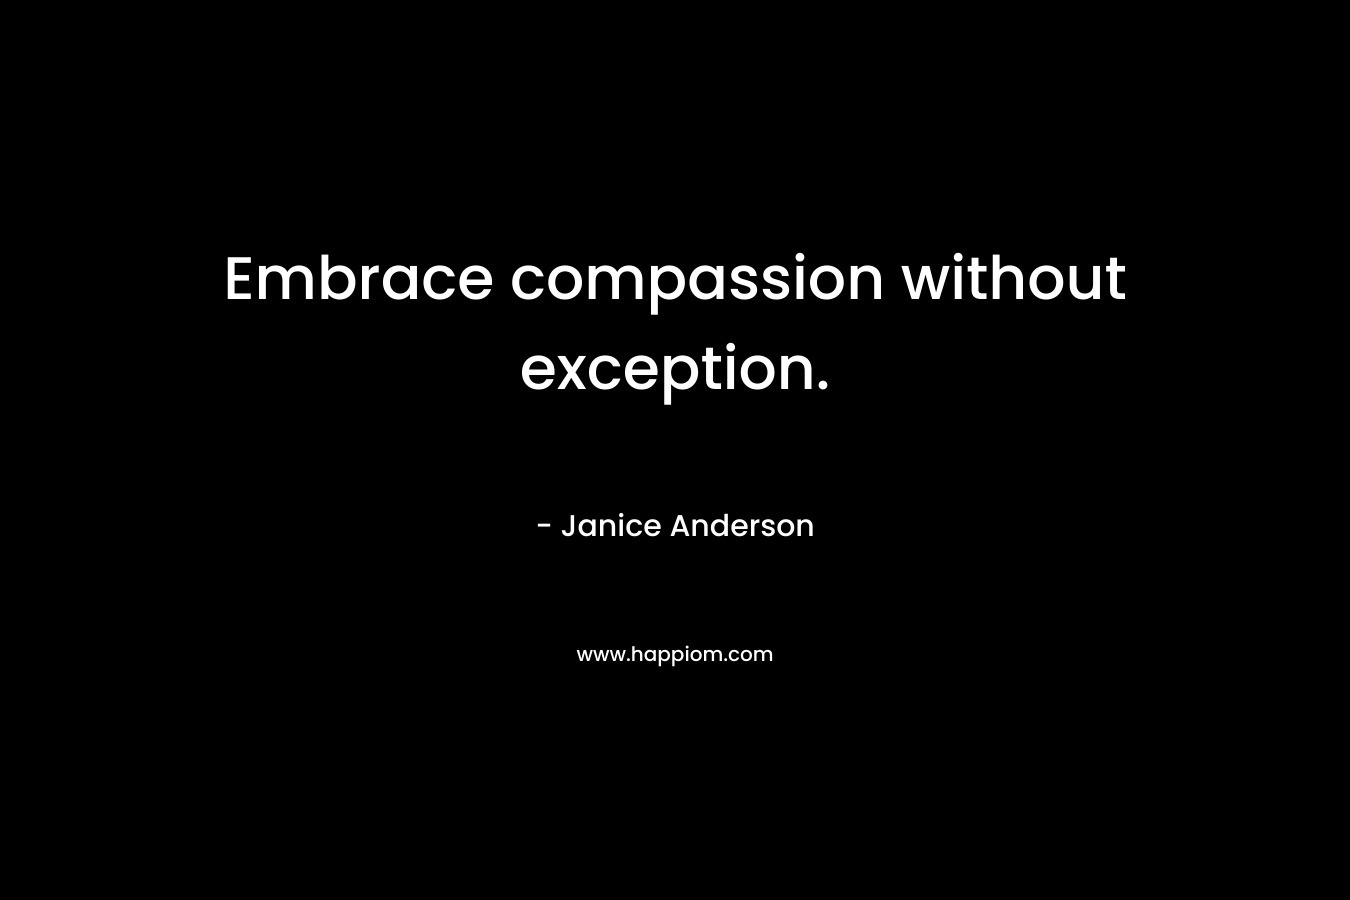 Embrace compassion without exception.